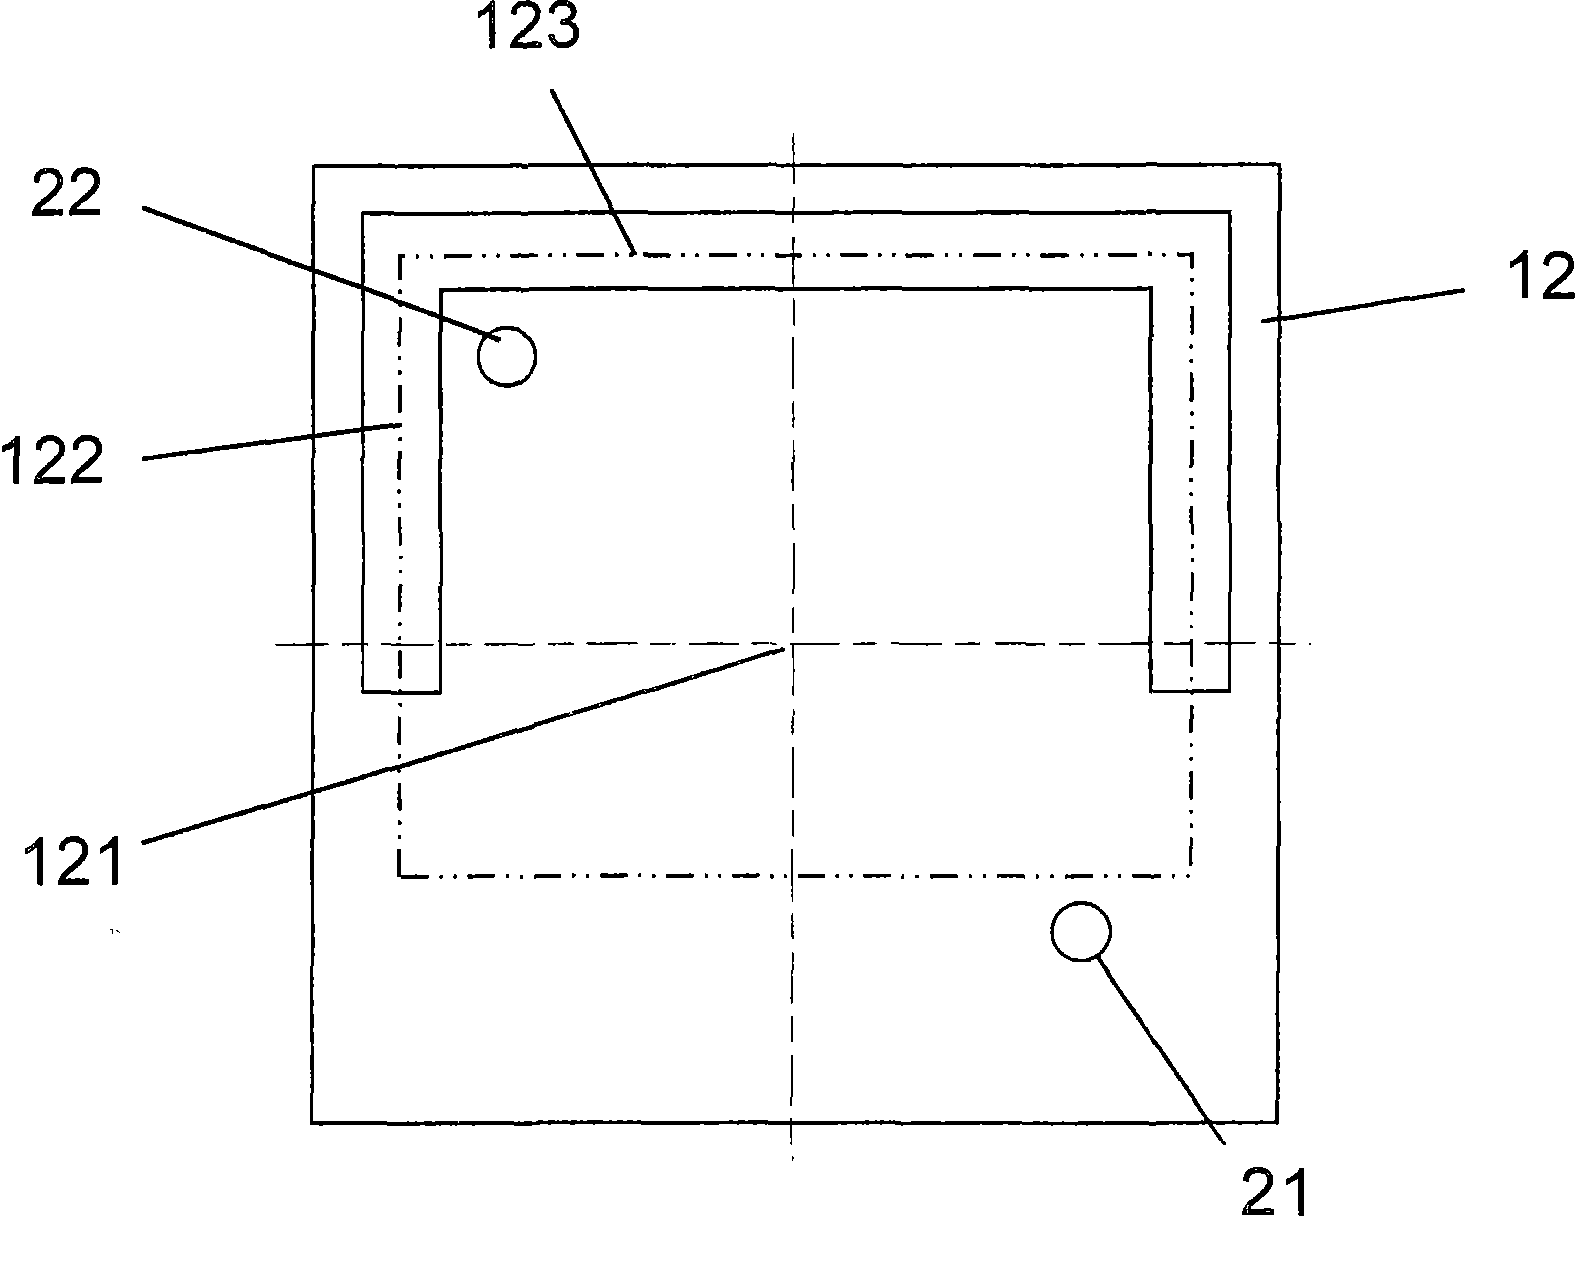 Photomask storage device and method for keeping photomask clean and dry